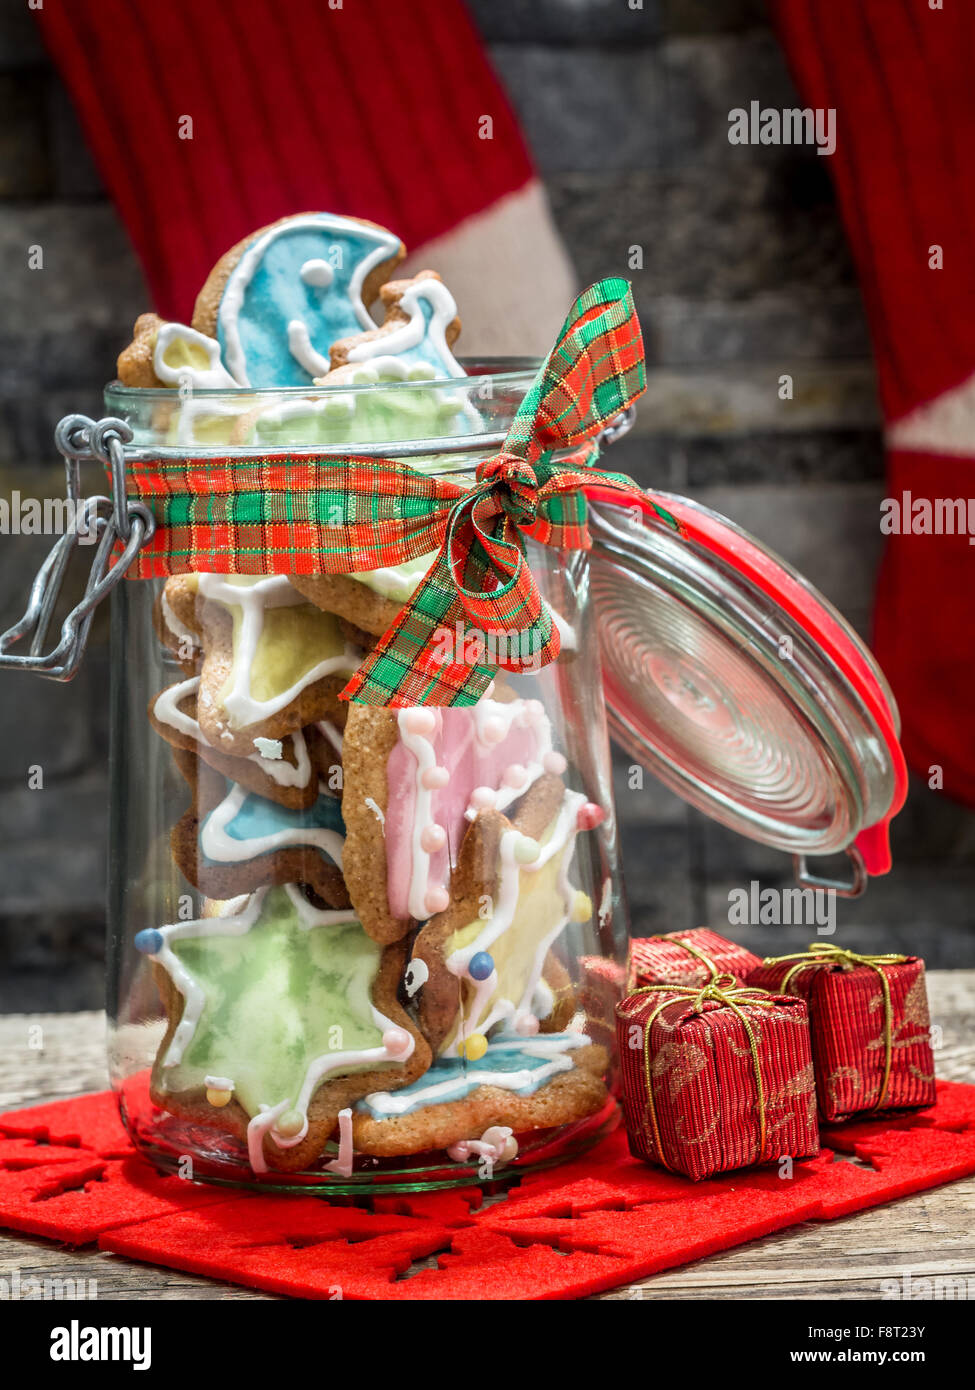 Assorted Christmas gingerbread cookies with colorful icing in glass jar on table Stock Photo